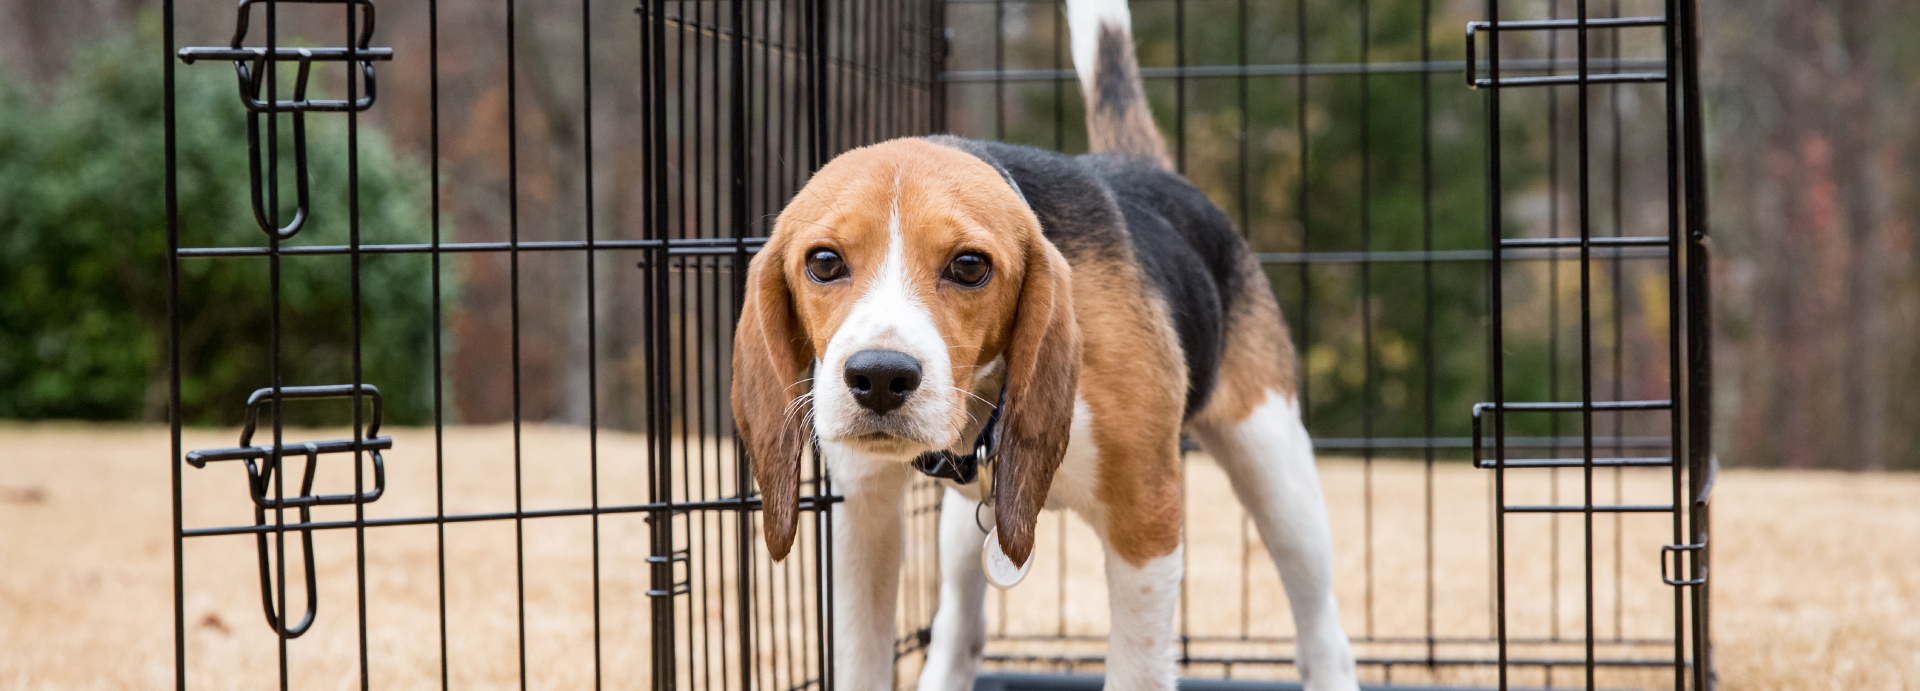 Beagle pups bred to be kept in cages and experimented on in labs found at the airport